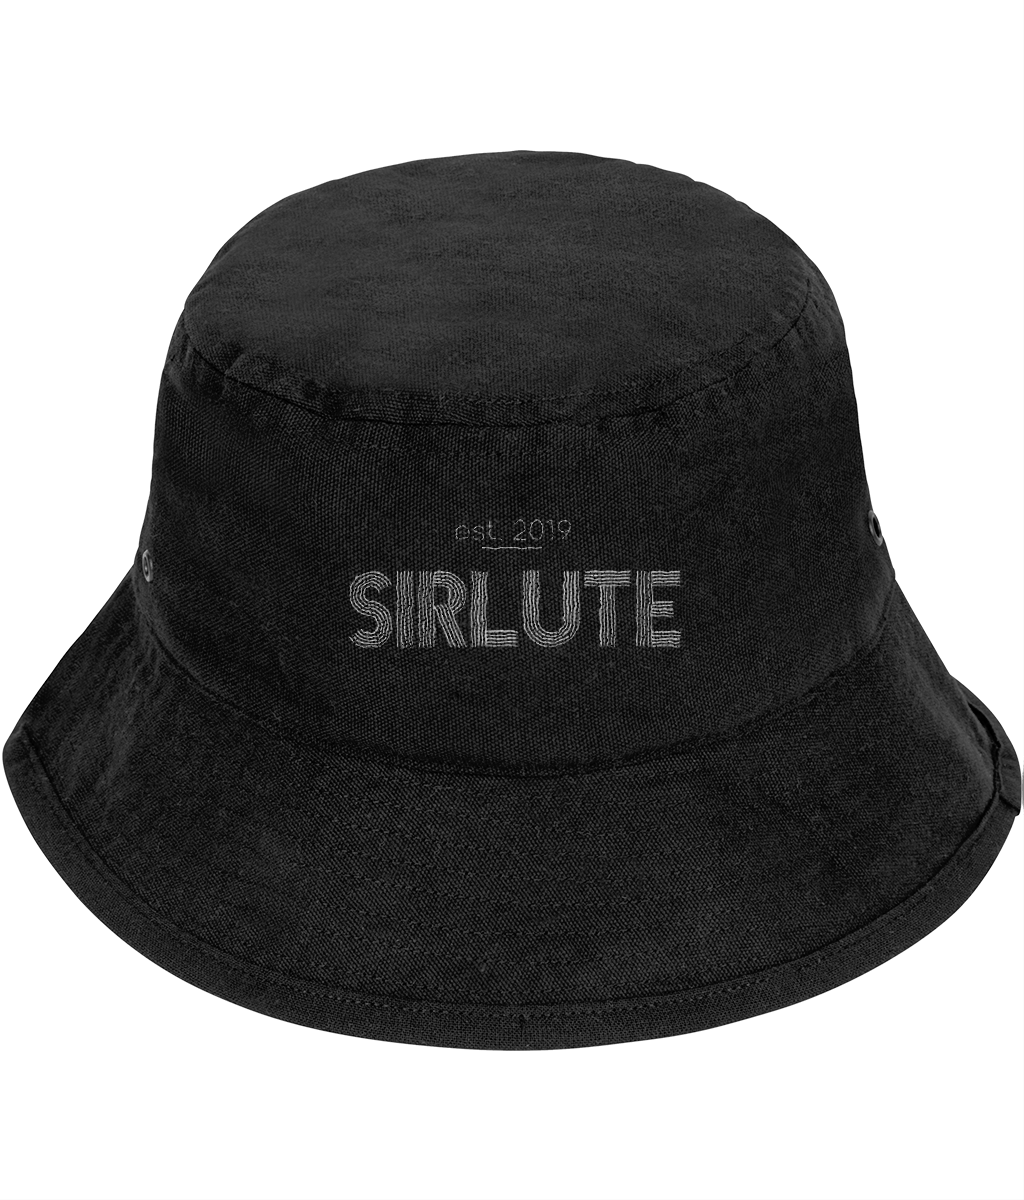 Sirlute Bucket Hat | Embroidered